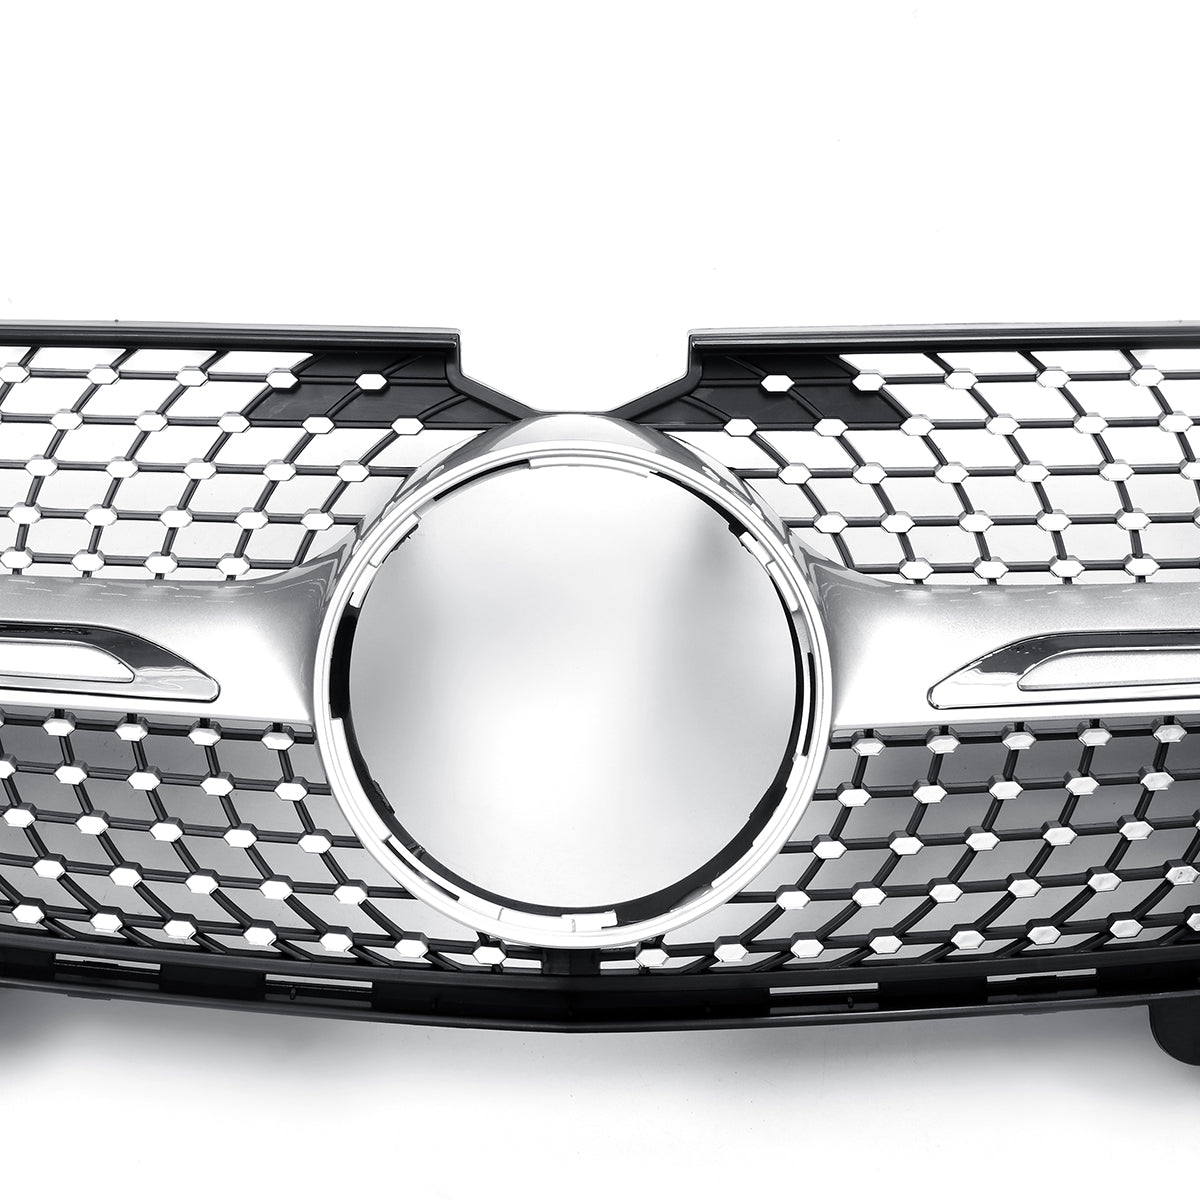 Lavender Silver Diamond Grille Front Grill For Mercedes-Benz X164 GL-Class GL450 GL350 GL320